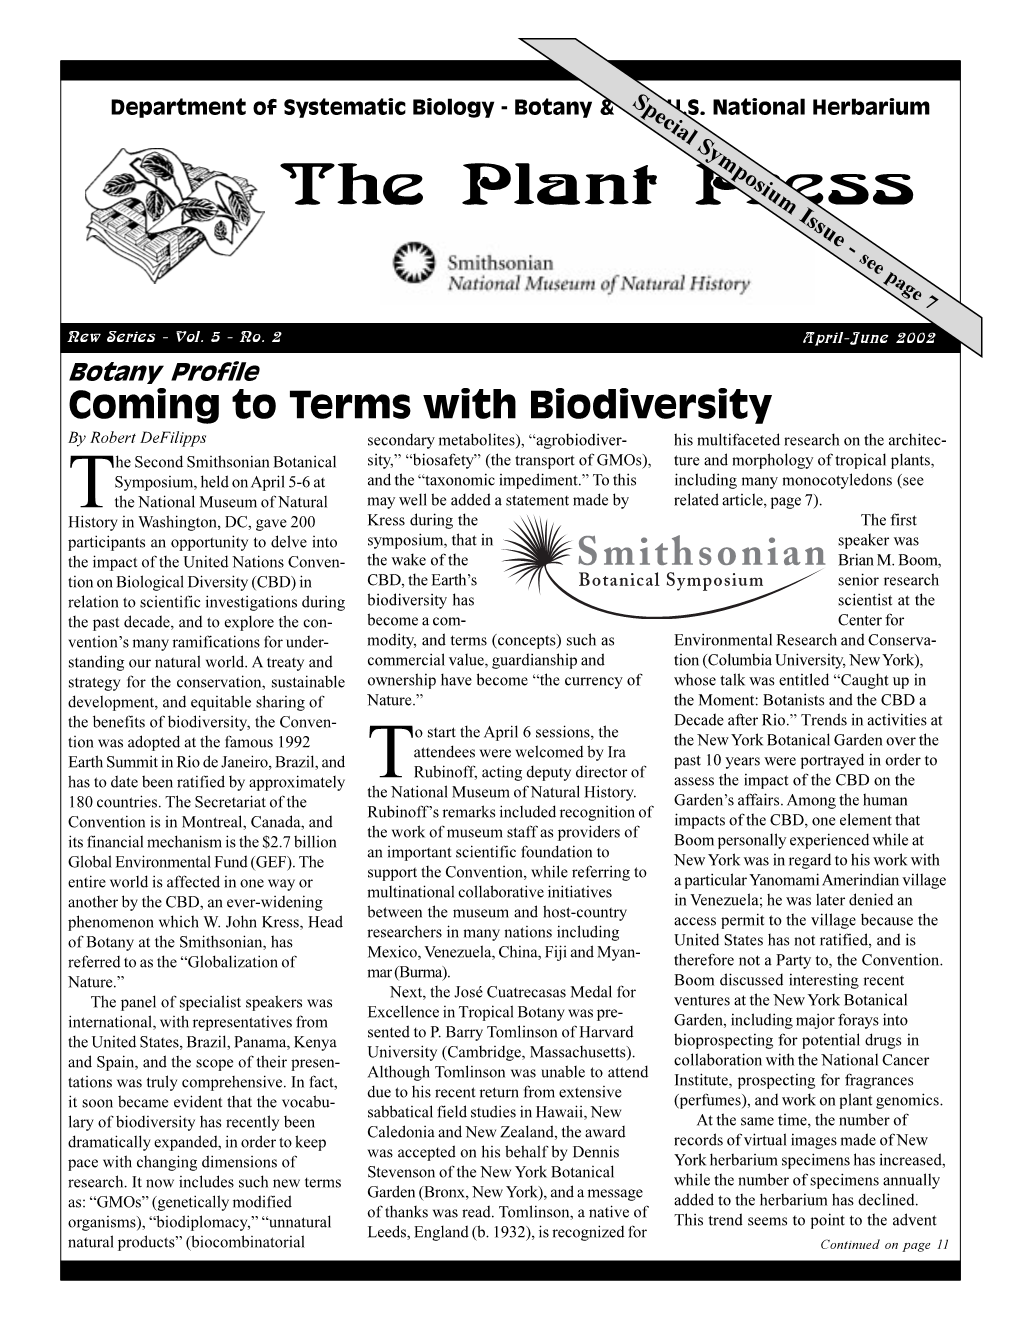 2002 Vol. 5, Issue 2